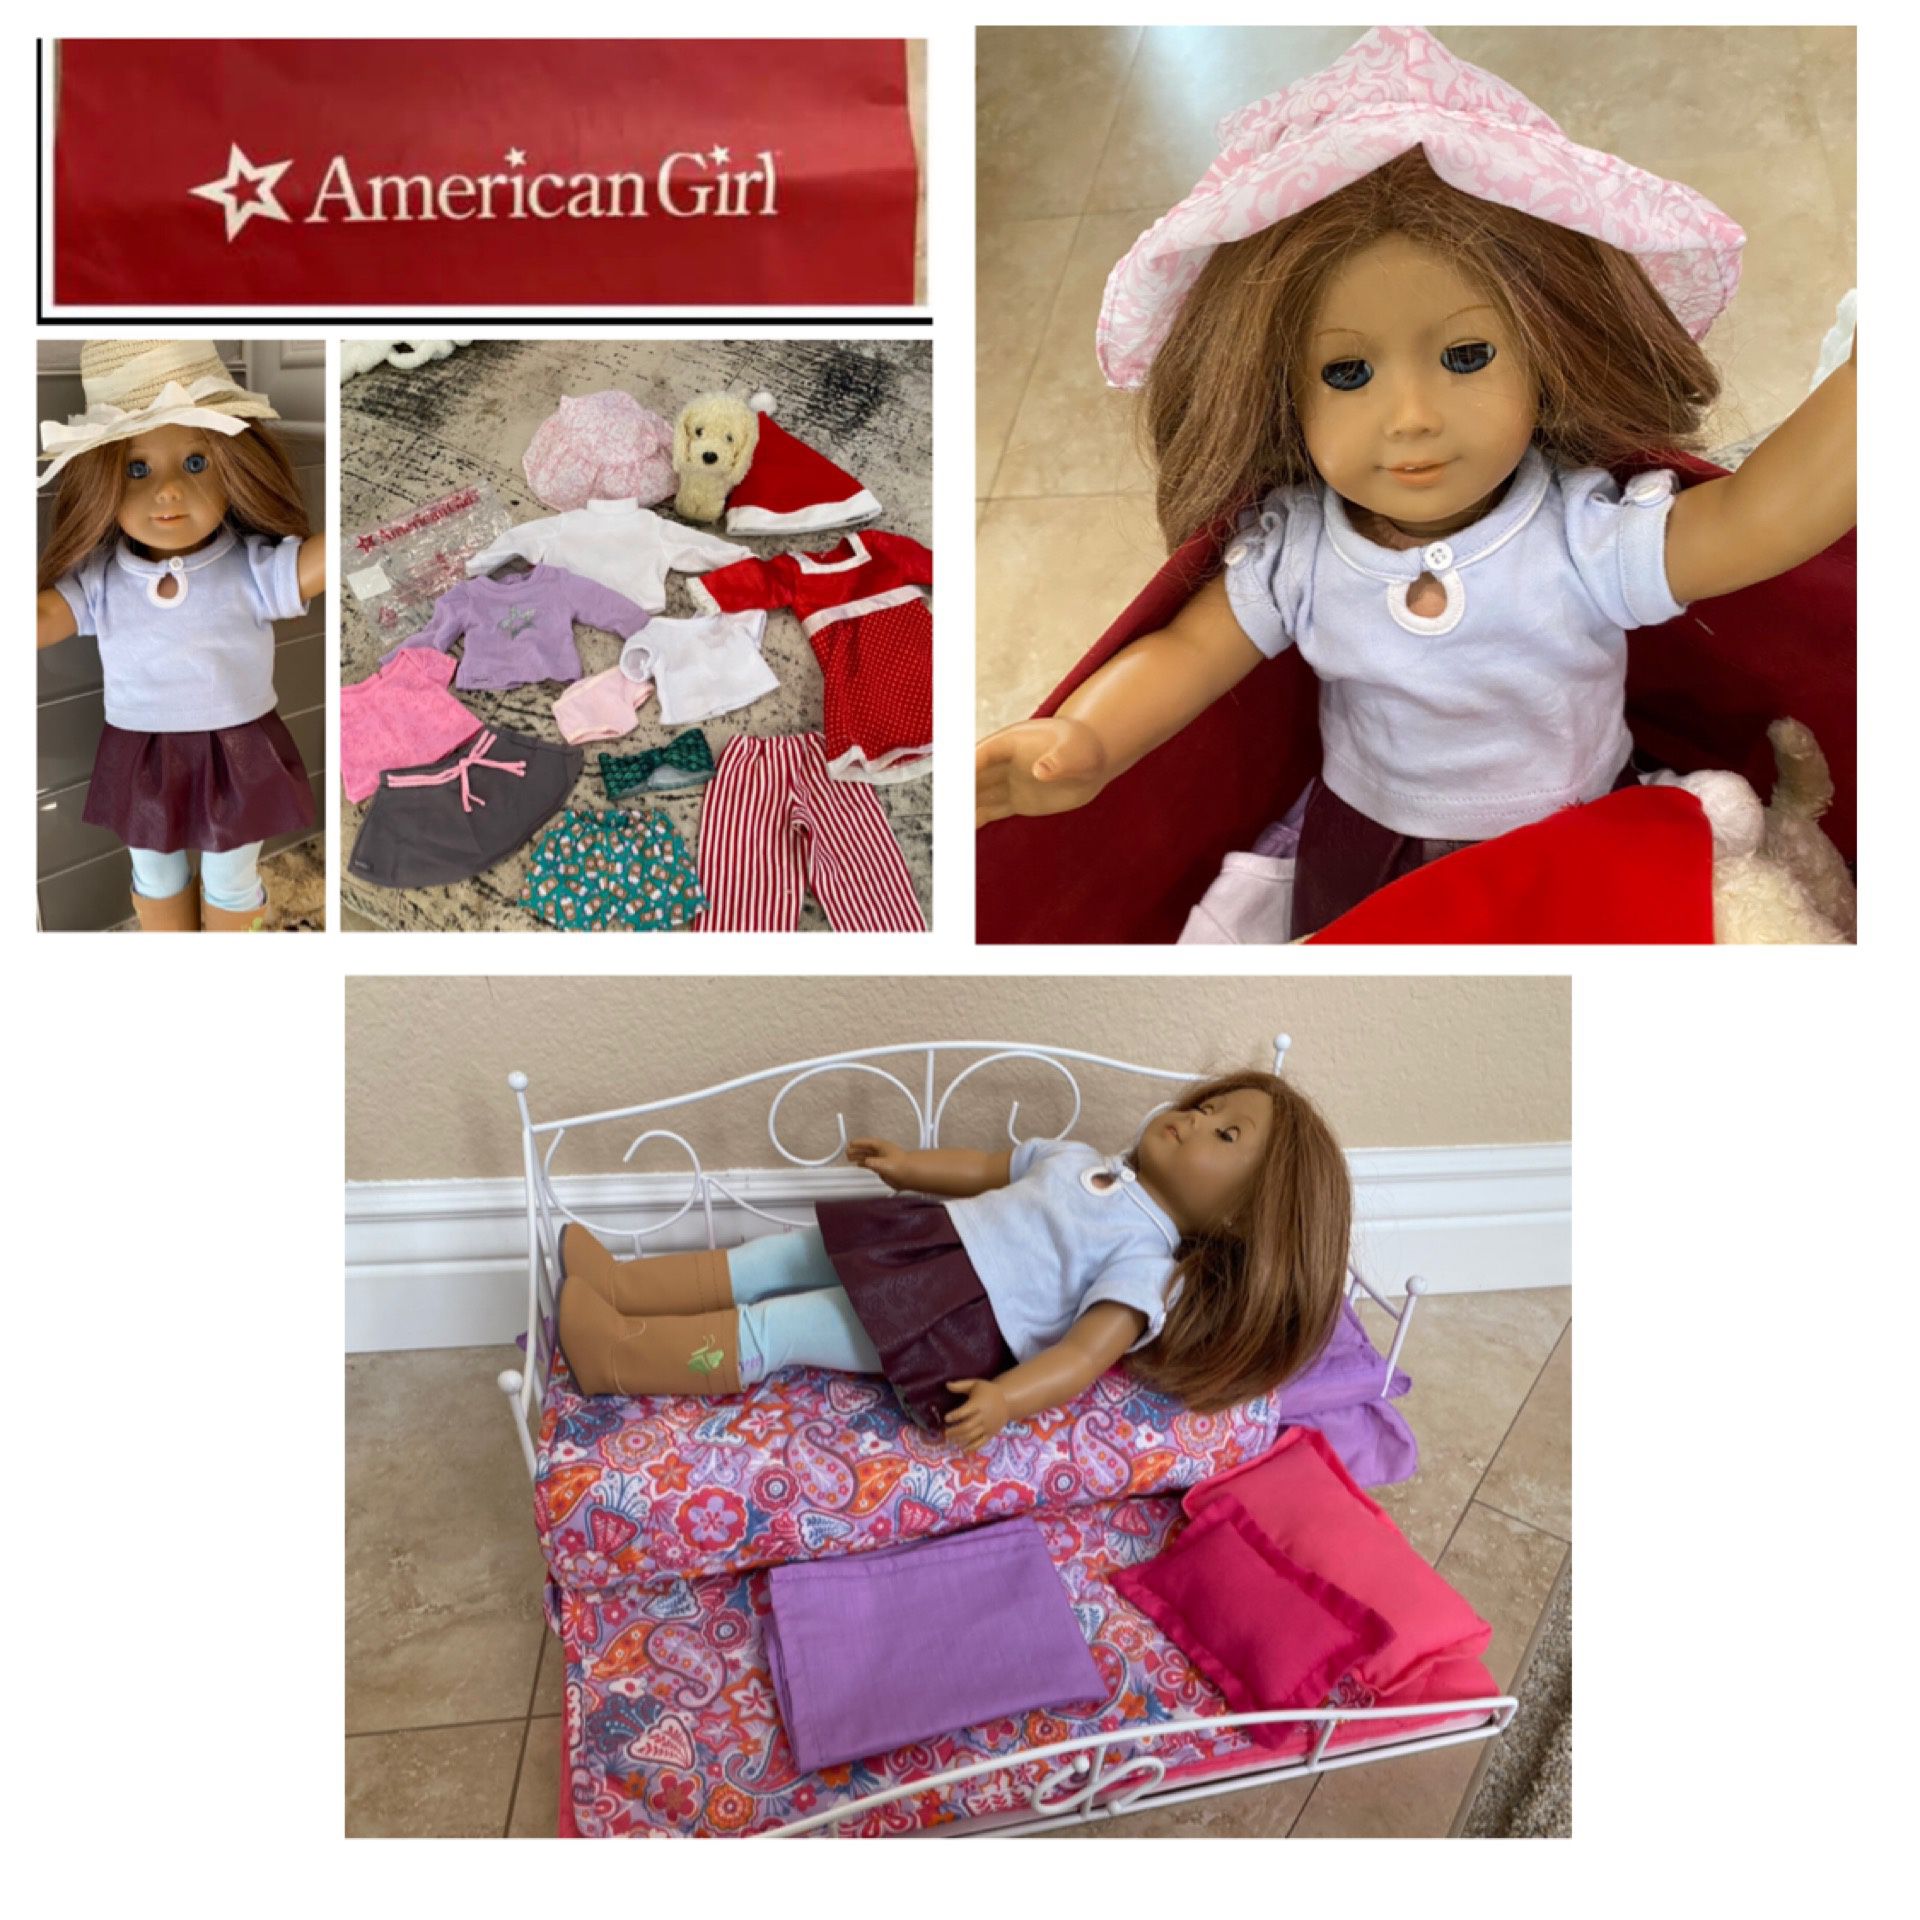 AMERICAN GIRL doll plus all accessories as shown in photos. Comes with a doll trundle bed with all bedding